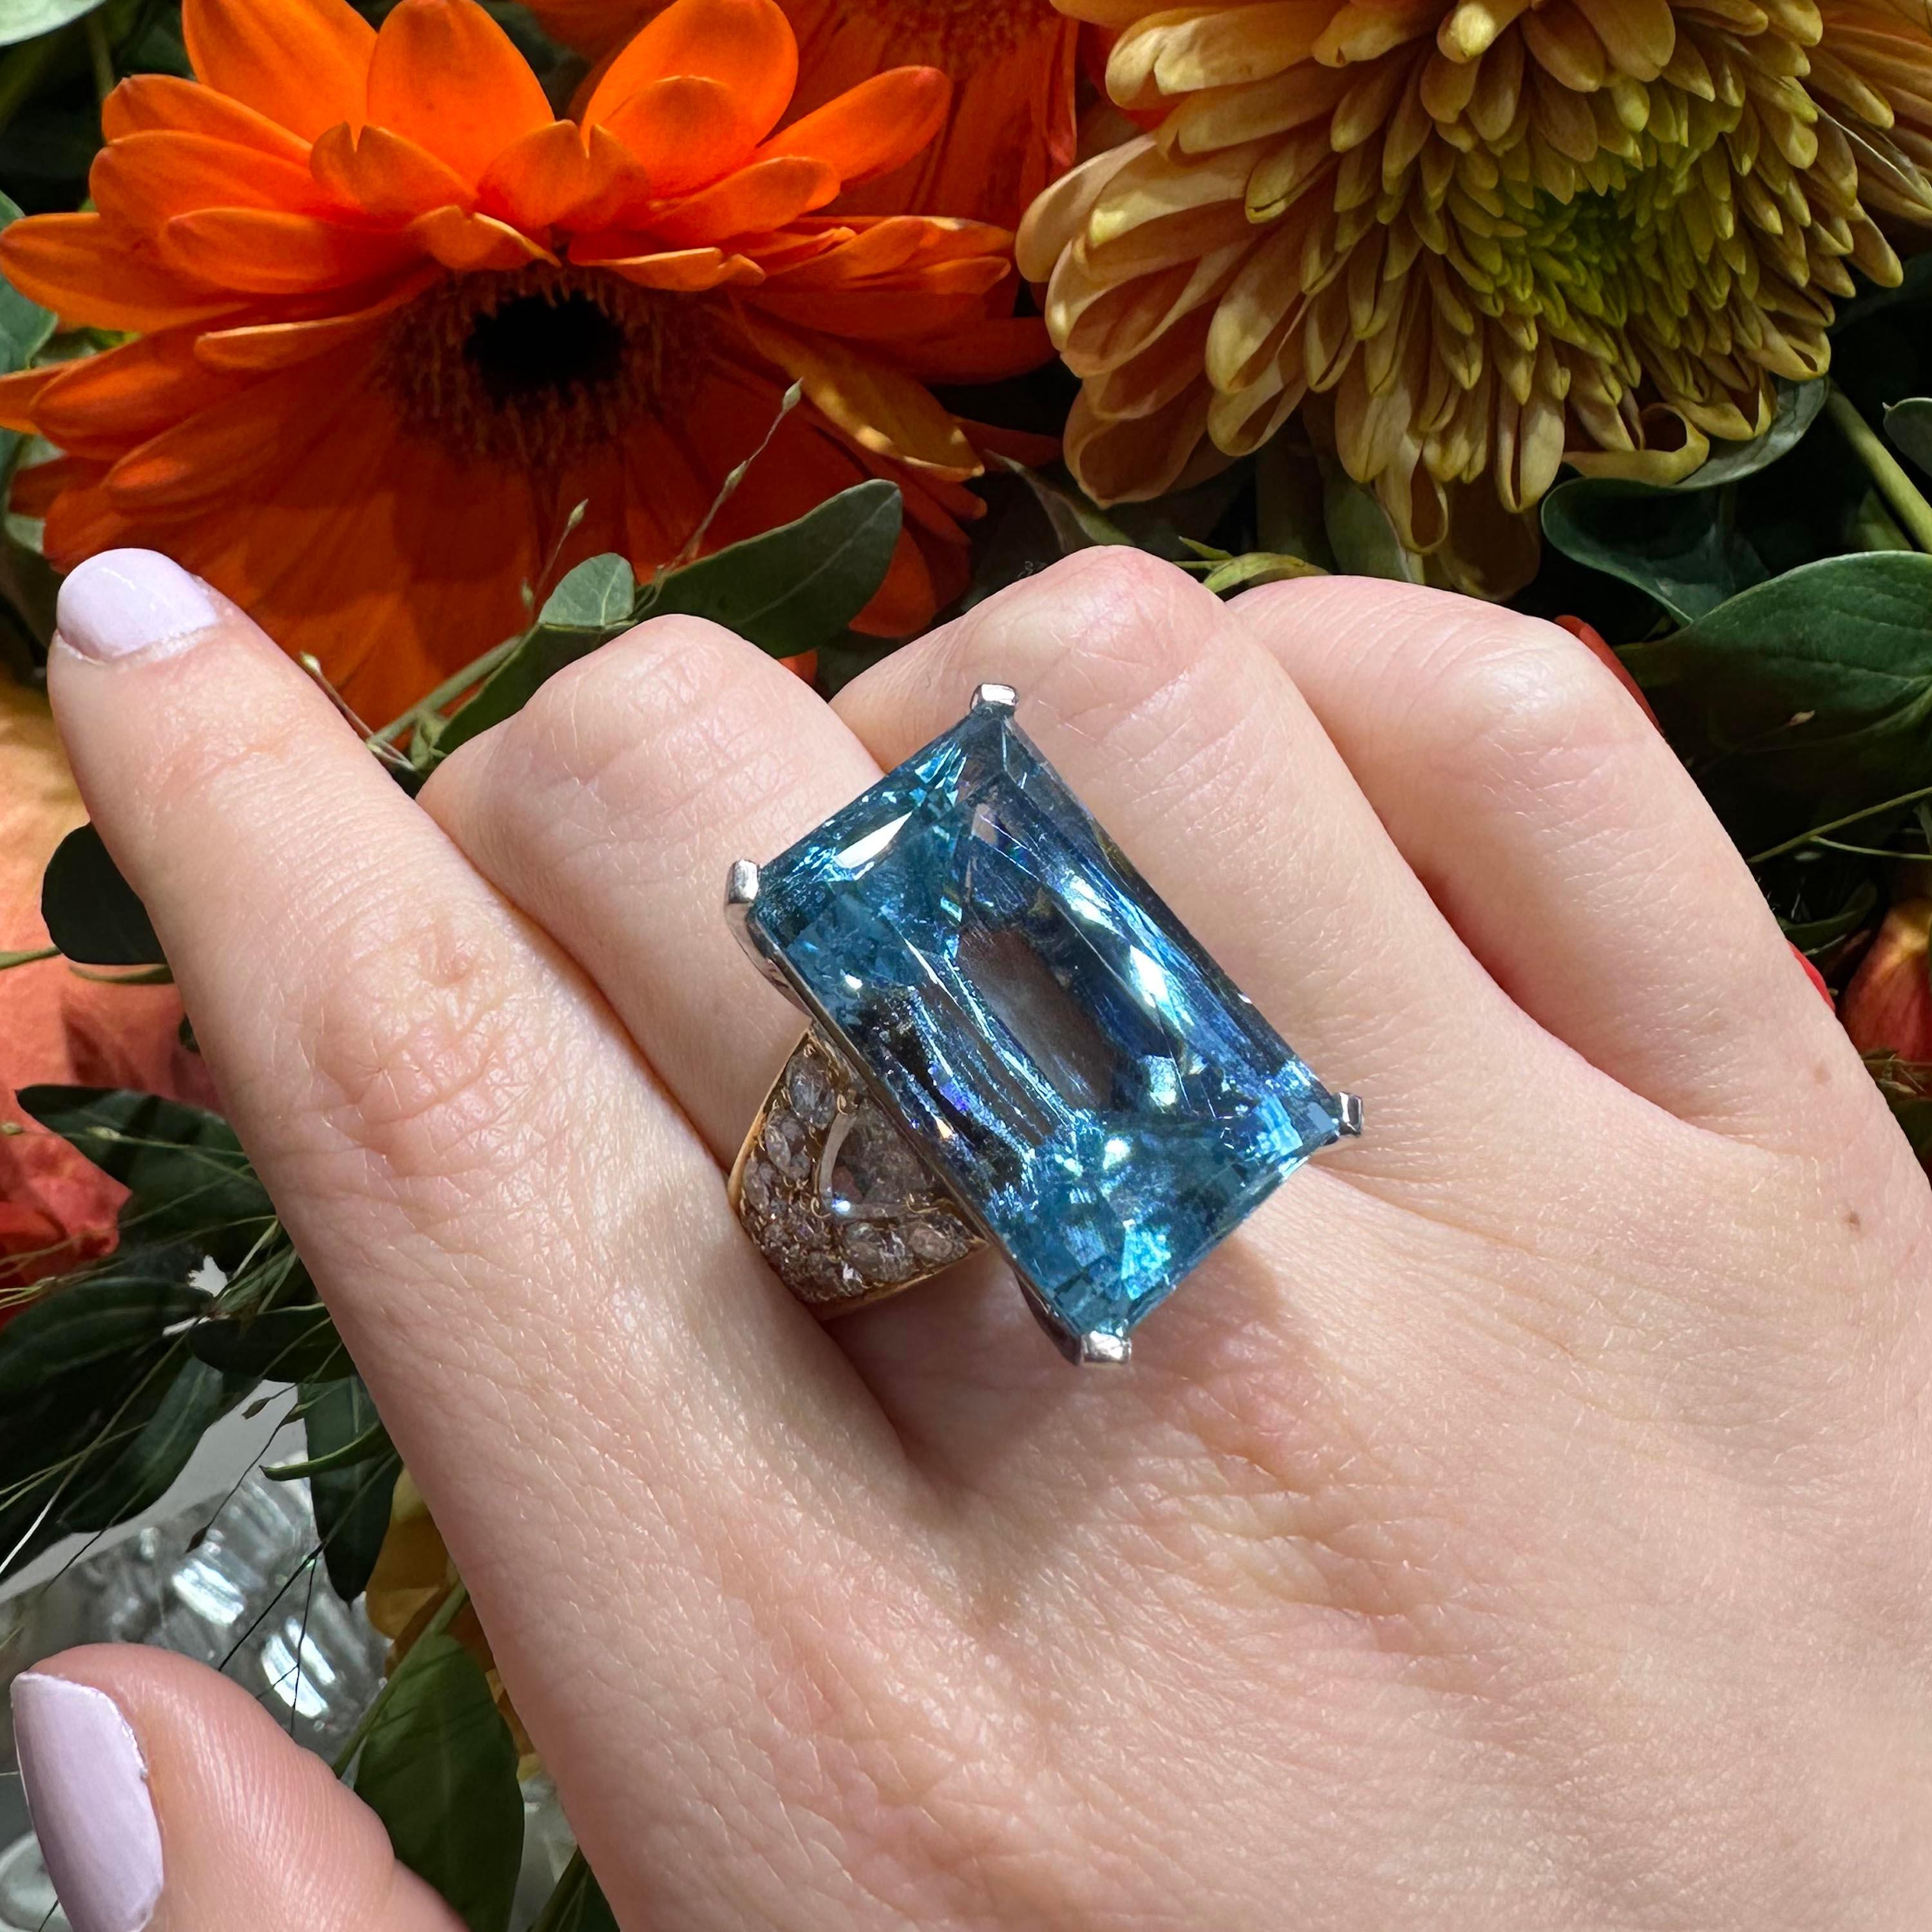 A vintage Italian Repossi aquamarine, diamond and gold dress ring, with a scissor-cut aquamarine, weighing approximately 35.00 carats, in a white gold four claw setting, with a trilliant-cut diamond set in the shoulders, surrounded by round